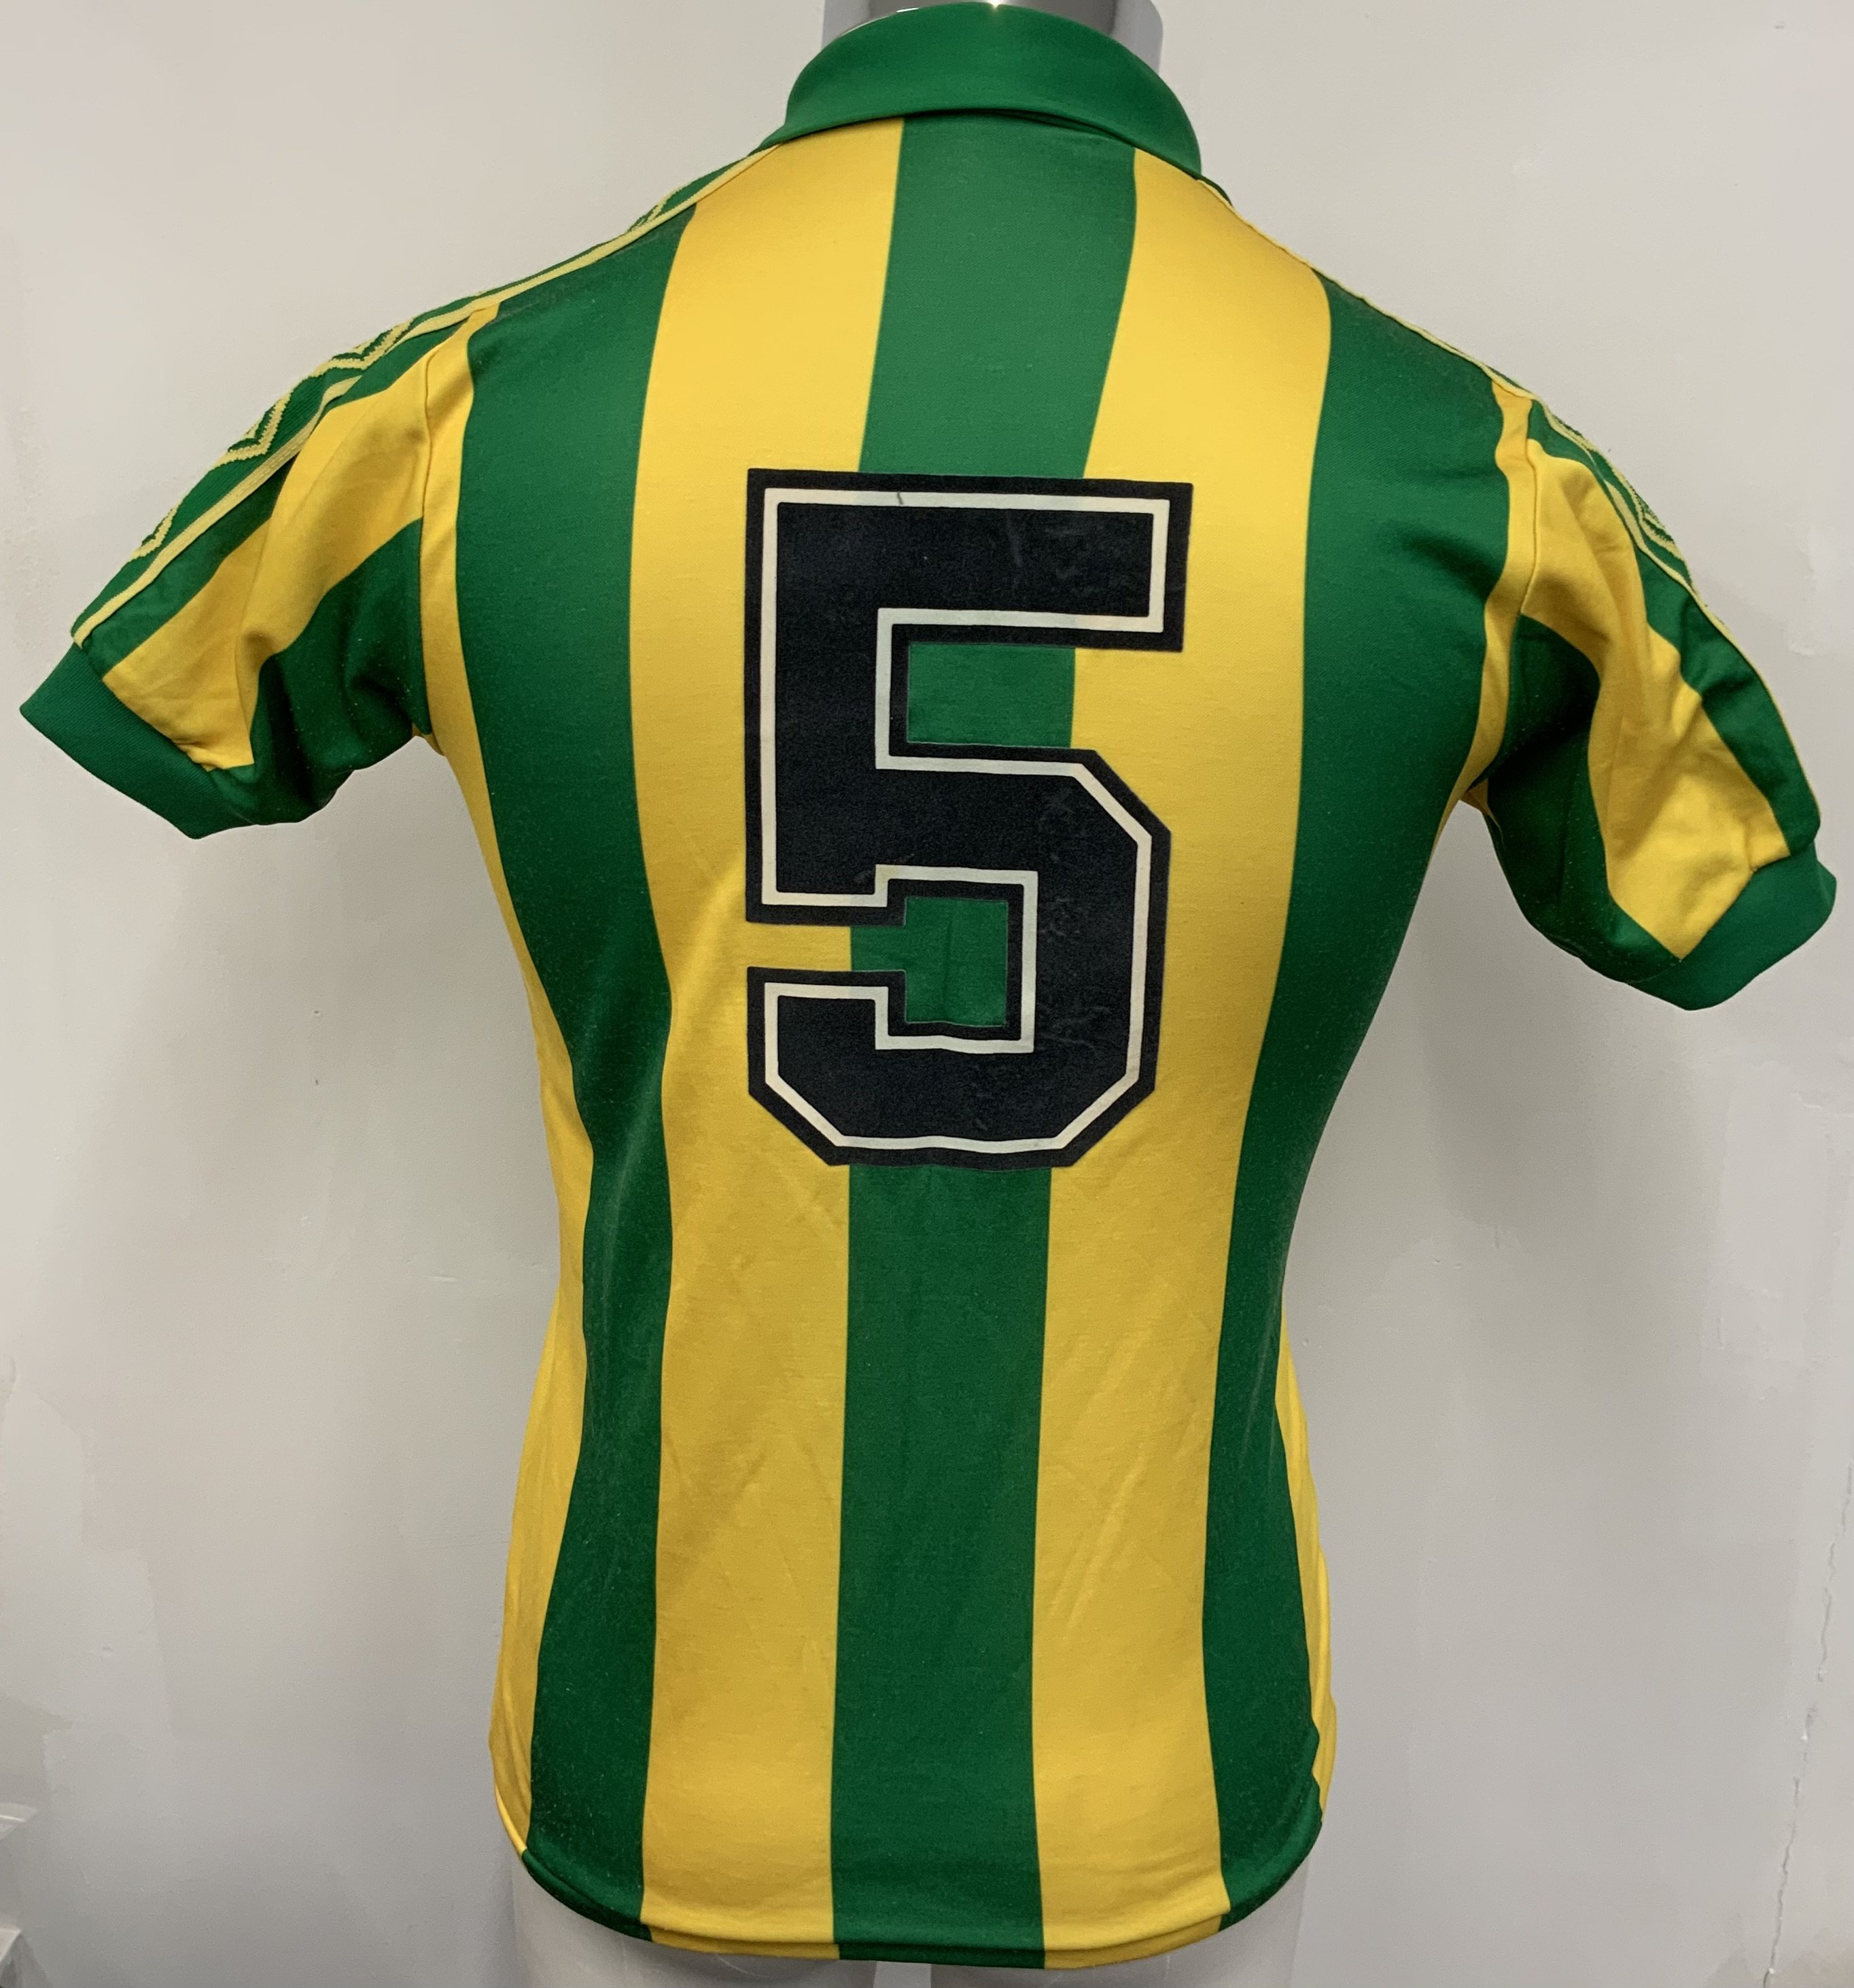 West Brom 1981 - 1982 Match Worn Away Football Shi - Image 2 of 3